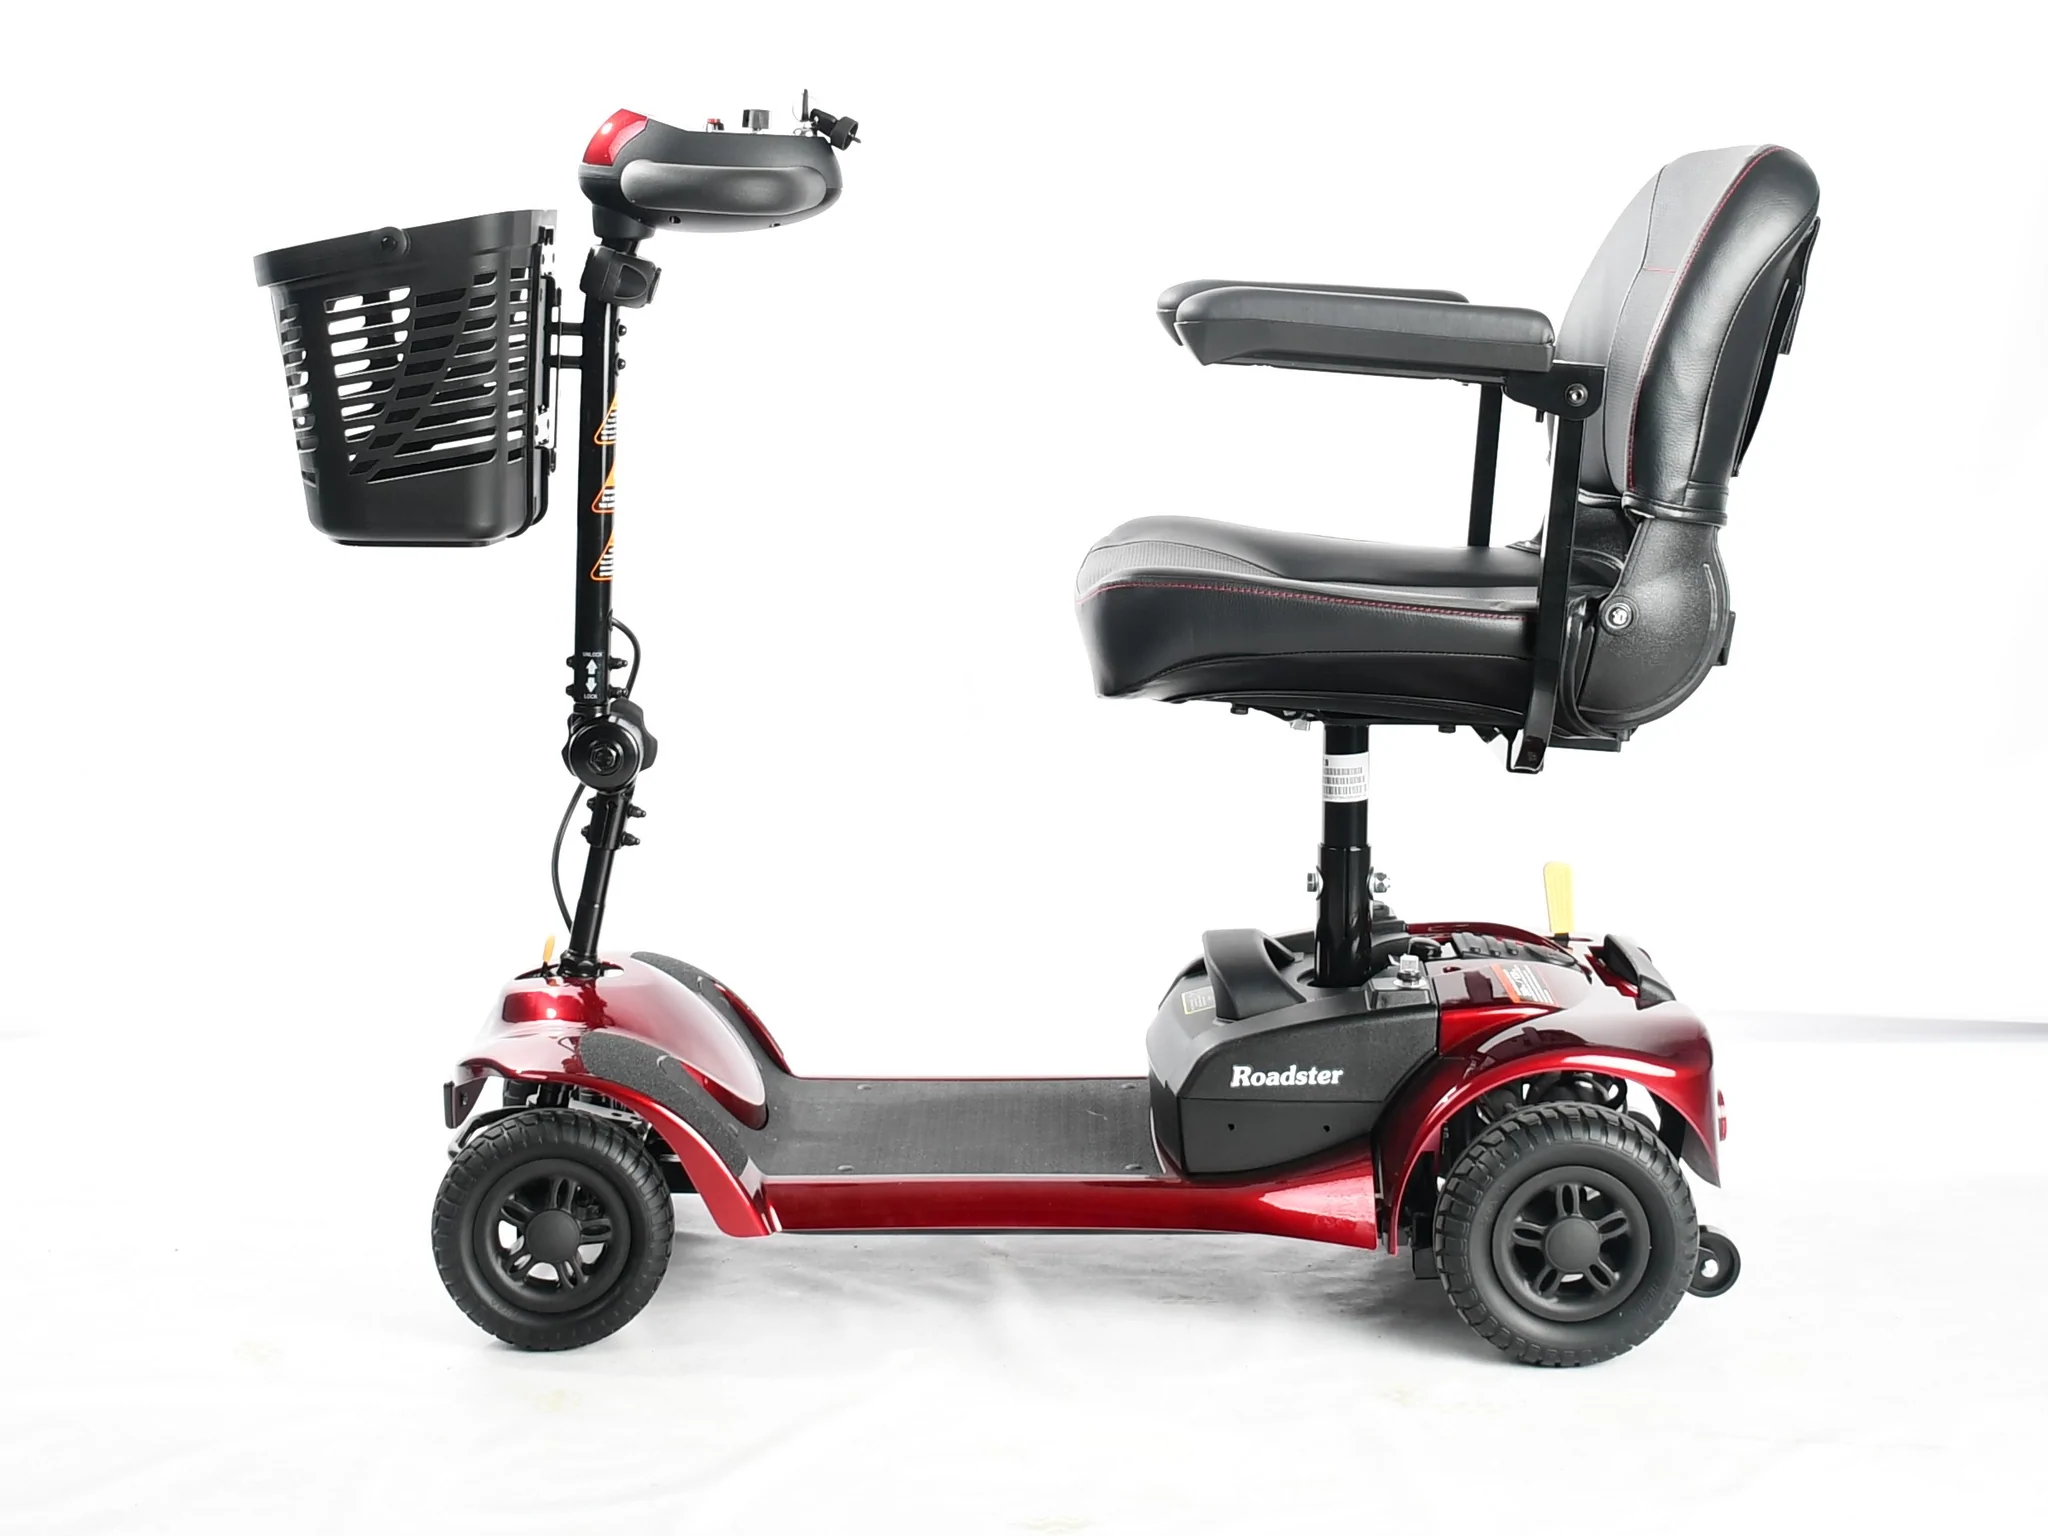 Merits-USA-S740-Roadster-4-Mobility-Scooter-left-side_1024x1024@2x